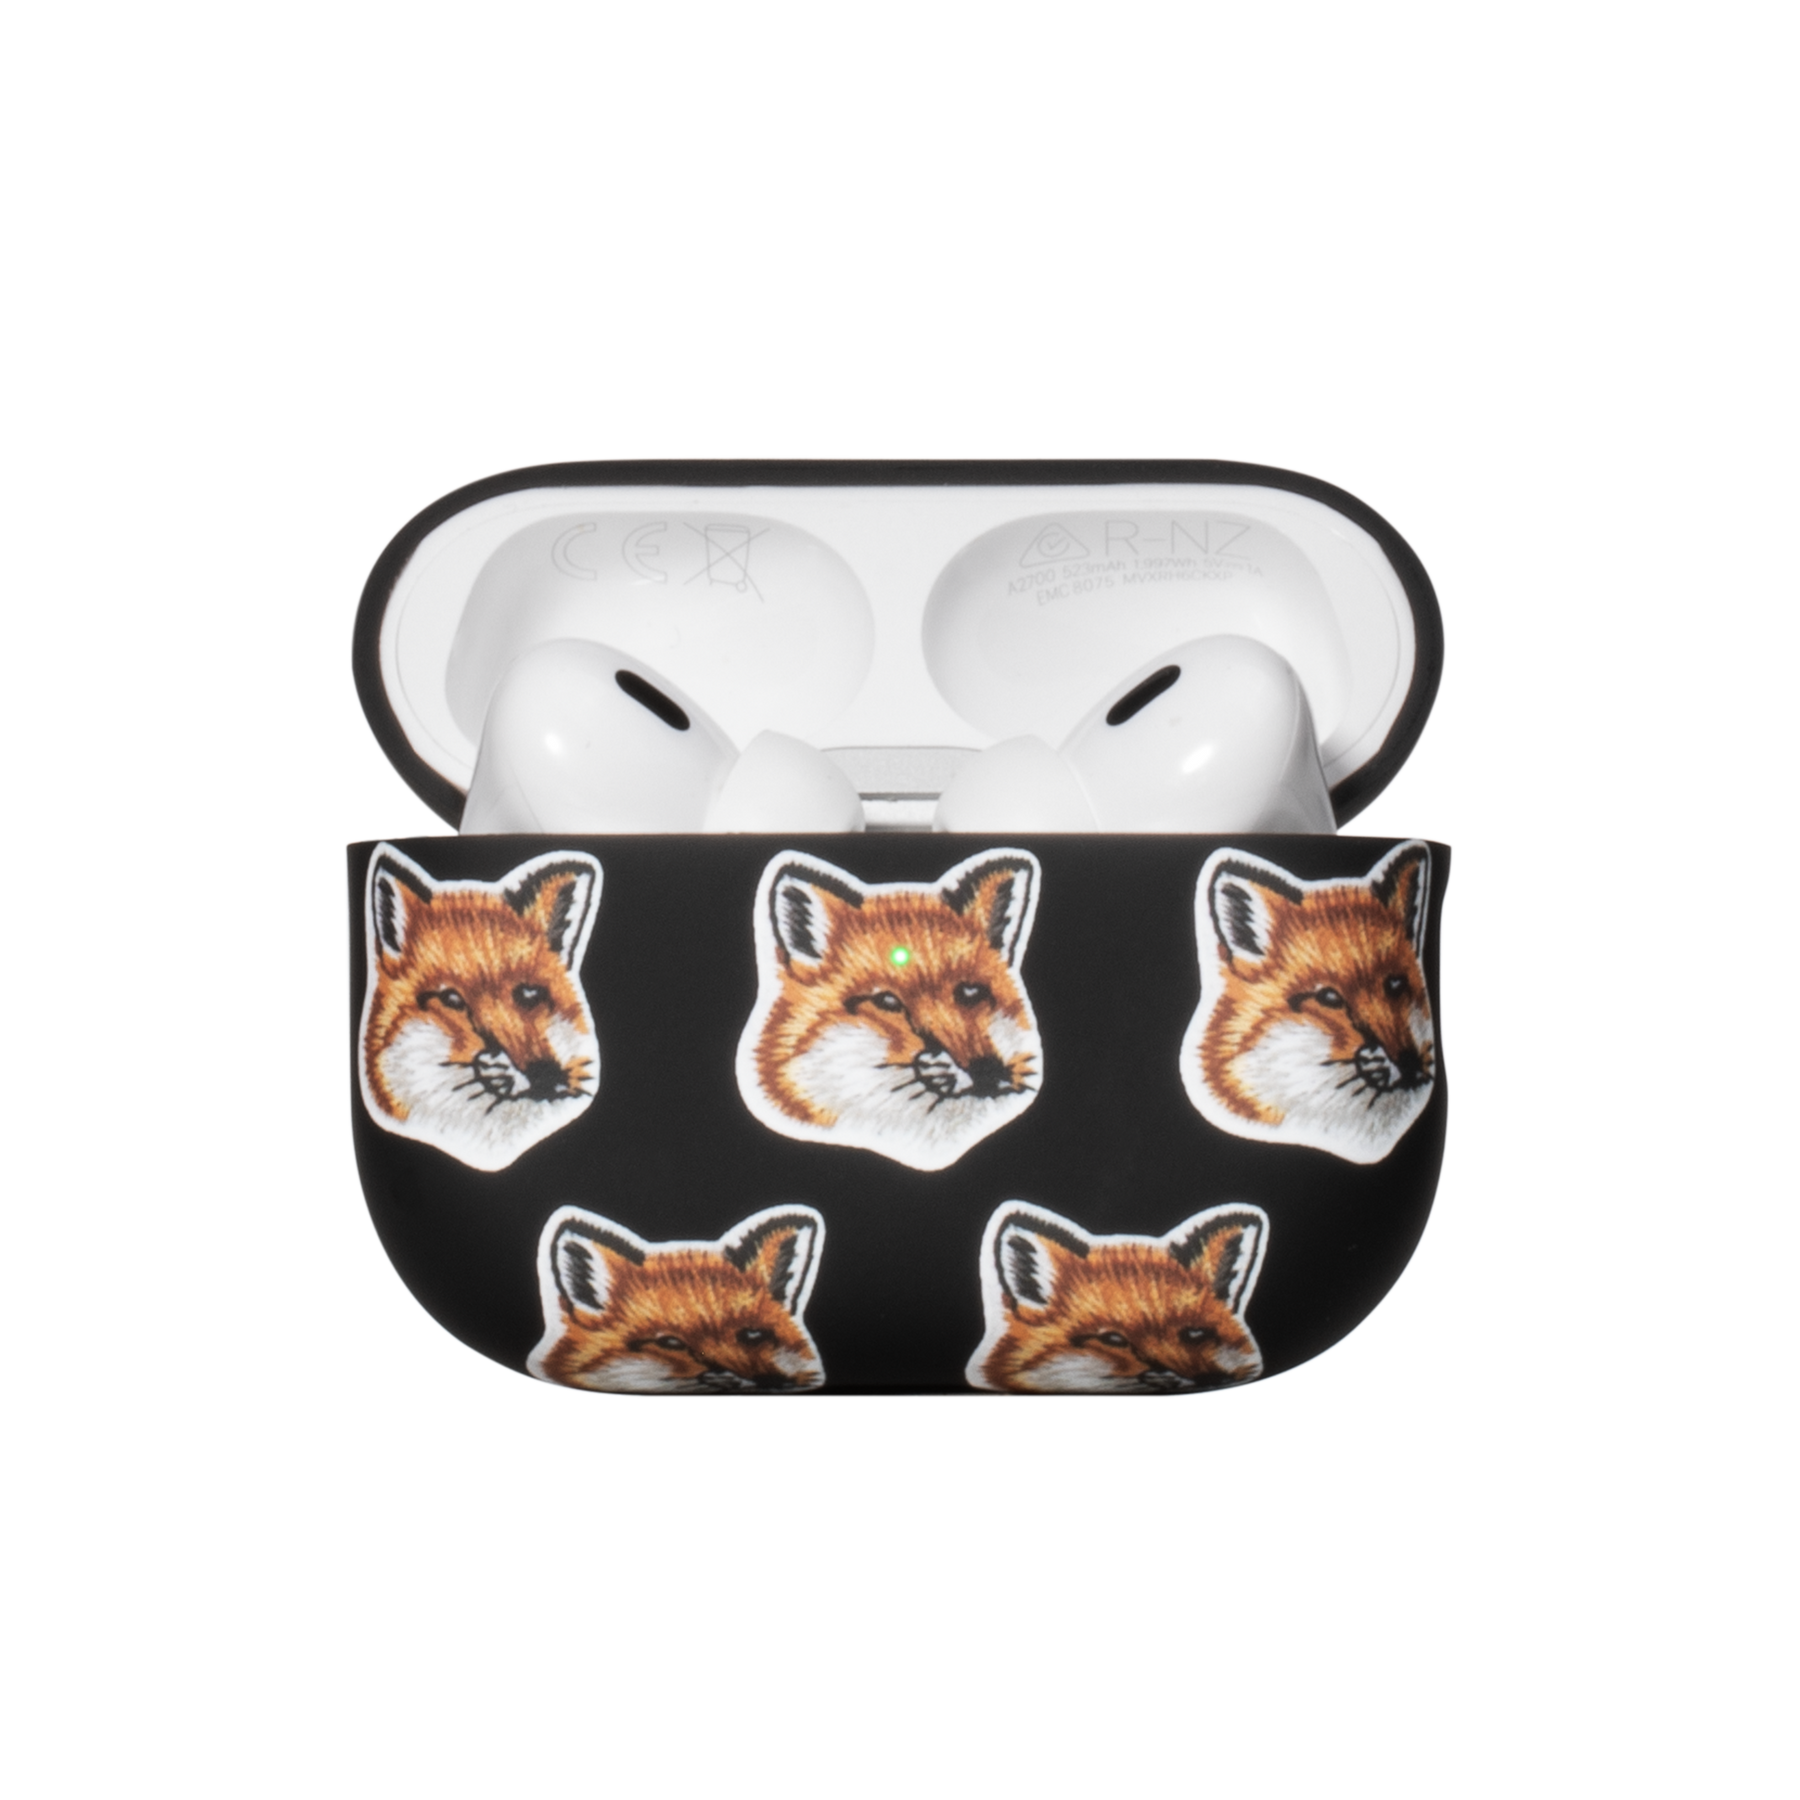 All Over Fox Head Case for AirPods Pro (2nd Gen)